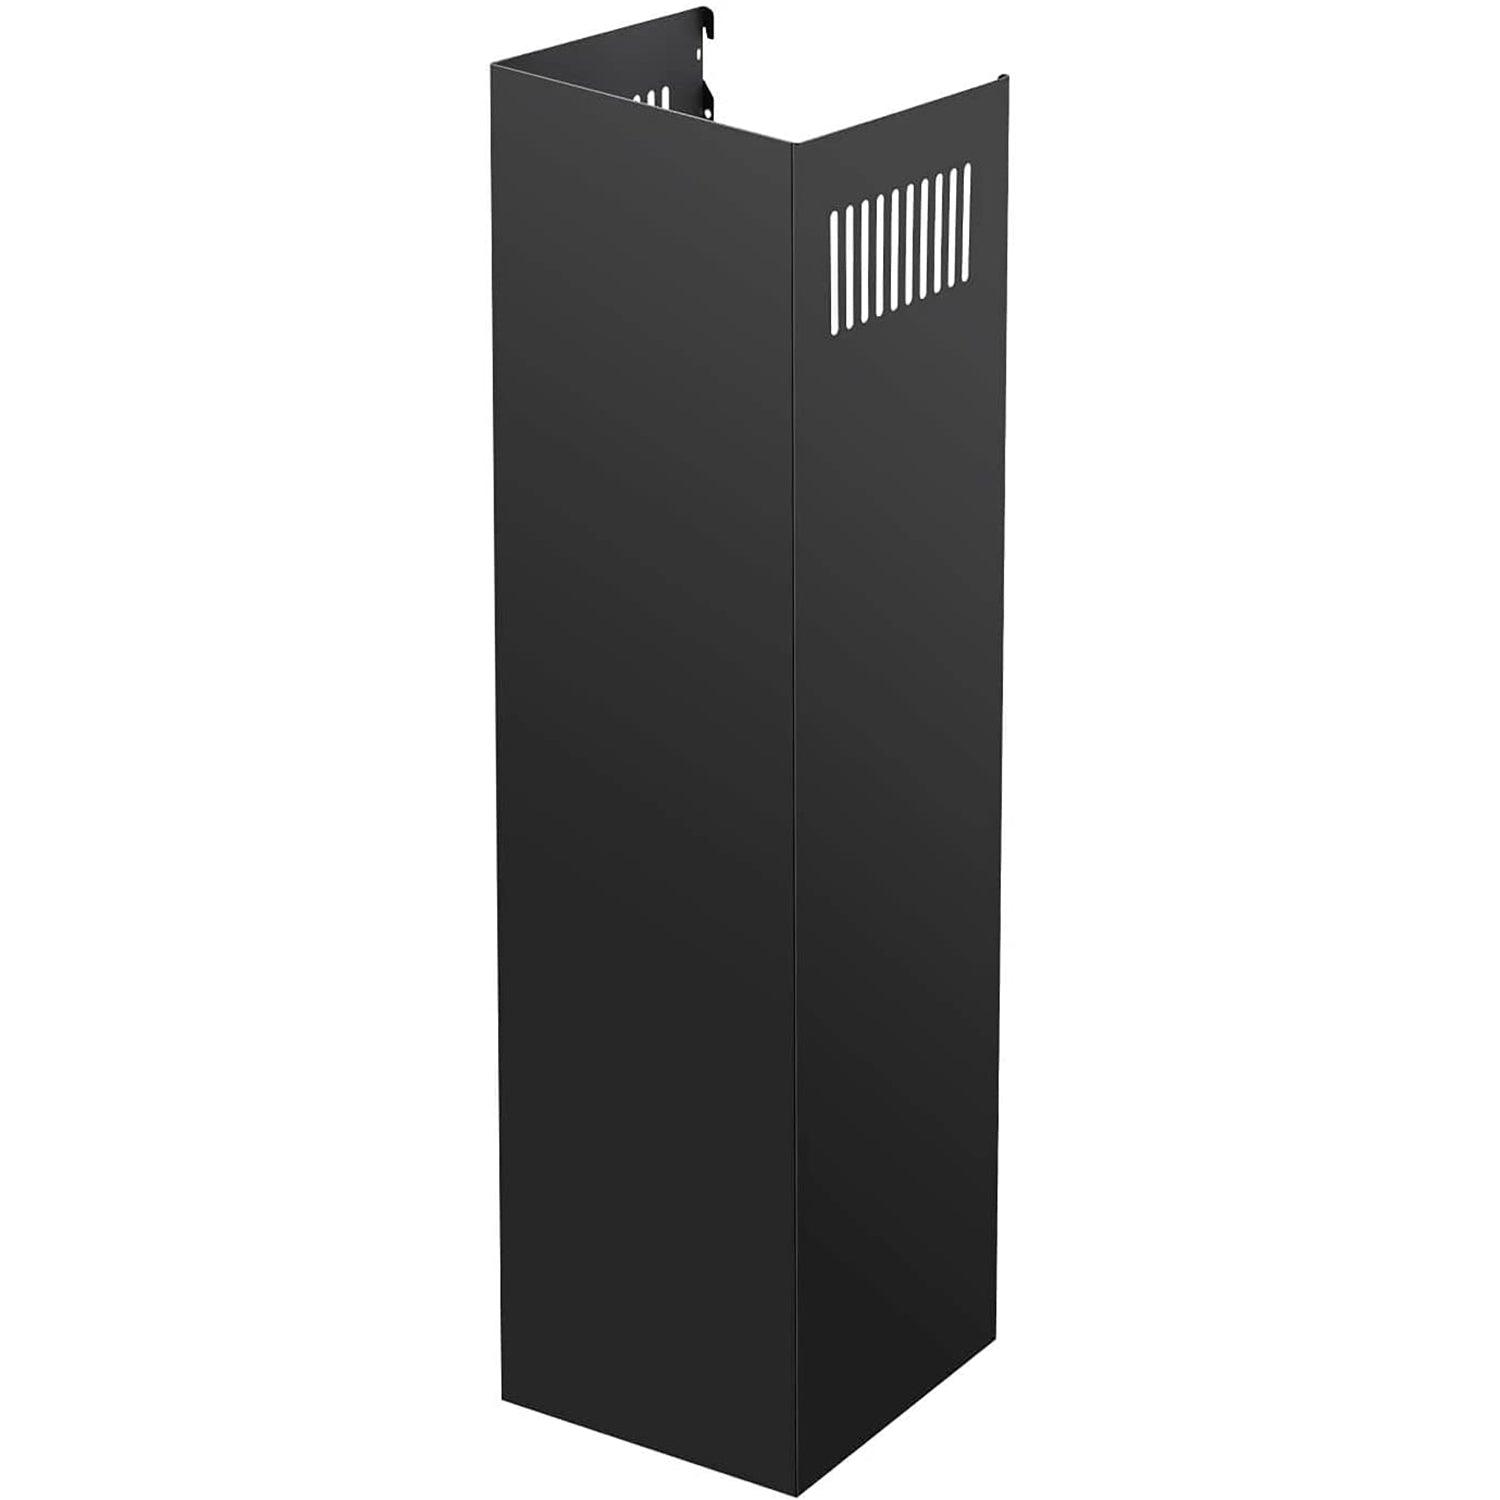 Stainless Steel Chimney Extension for TIEASY Range Hood GD17 and GD24 Series, 31.5 inch, Wall-Mounted style (Black)